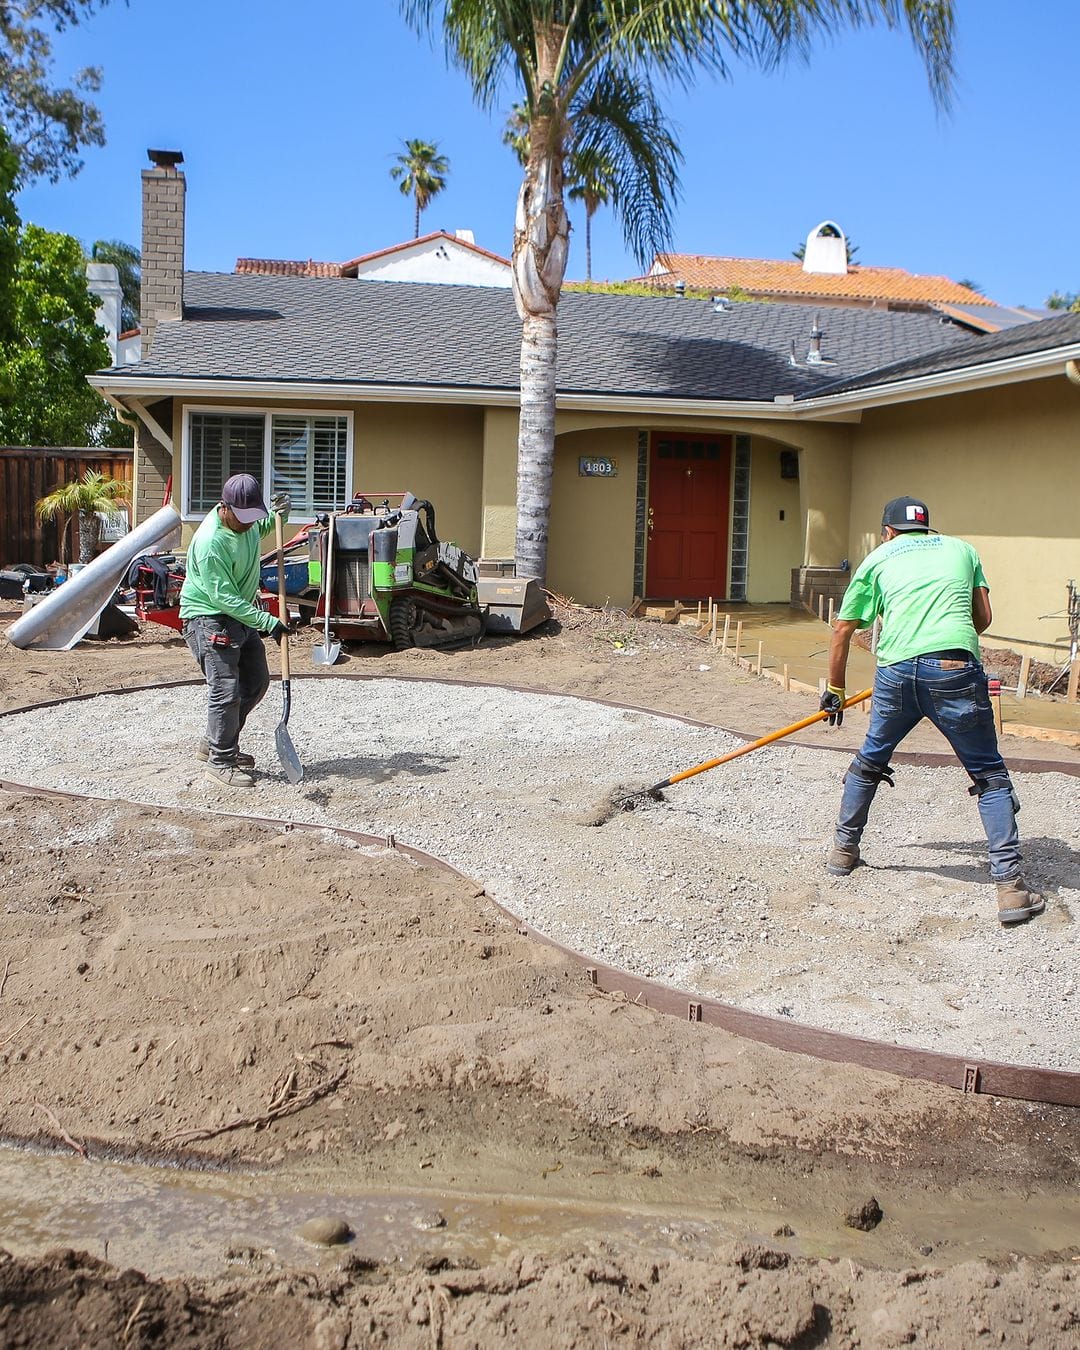 Two men working on a concrete patio in front of a house.